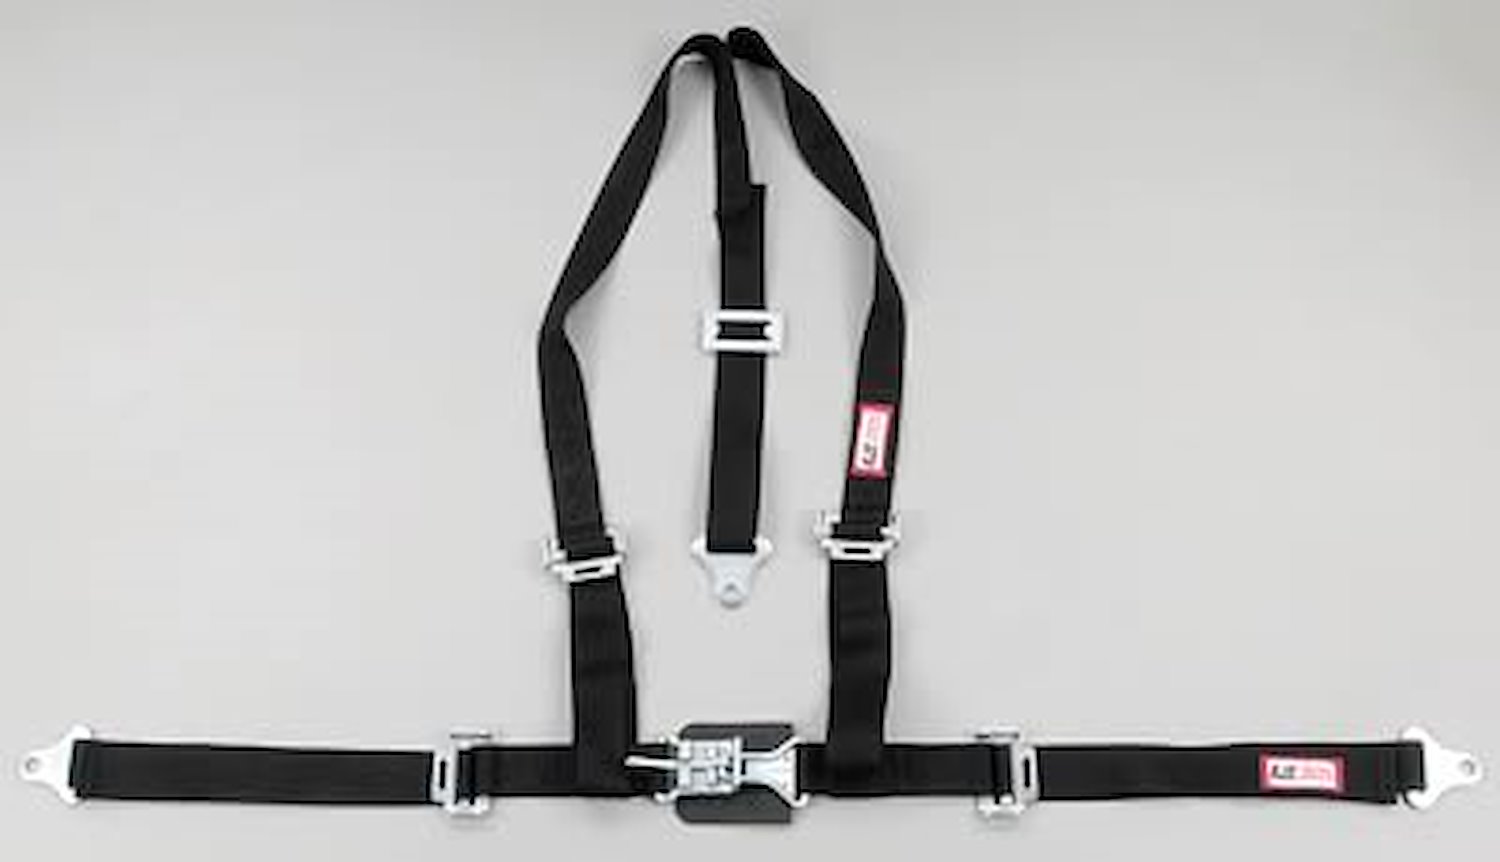 NON-SFI L&L HARNESS 3 PULL DOWN Lap BELT SEWN IN 2 S.H. Y FLOOR Mount w/STERNUM STRAP ALL WRAP ENDS HOT PINK